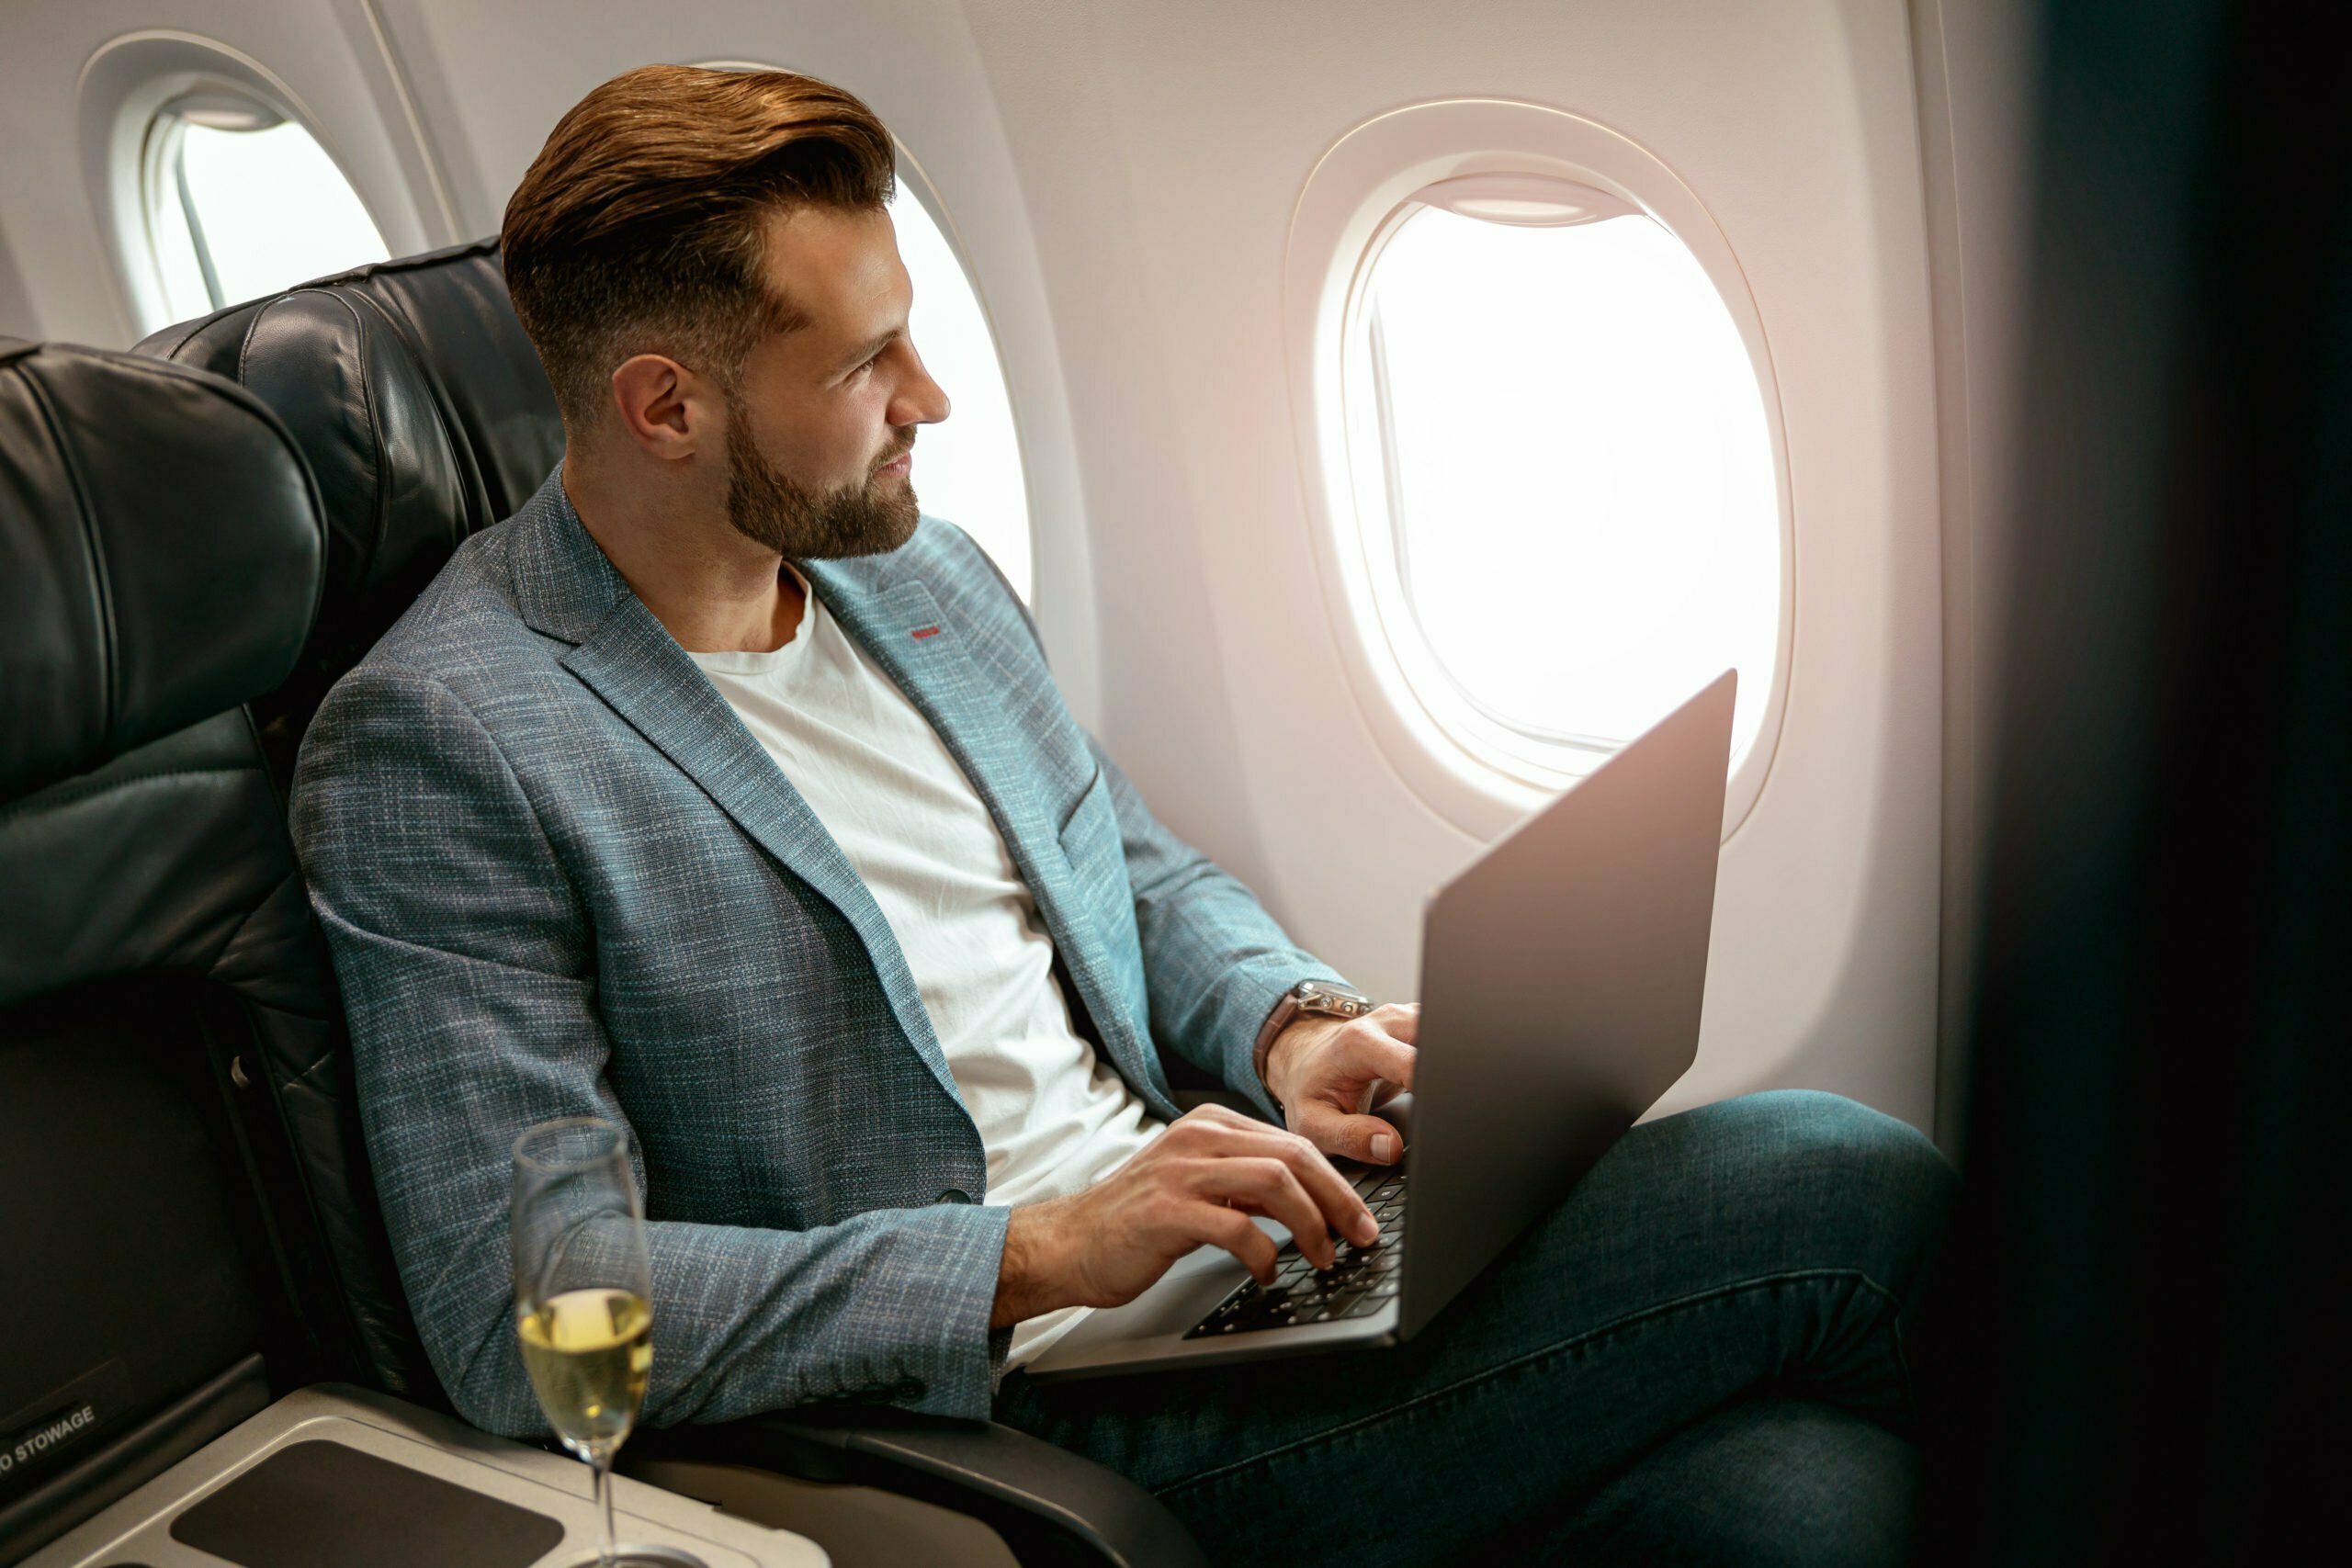 Bearded man sitting in passenger chair and looking out aircraft window while using modern notebook